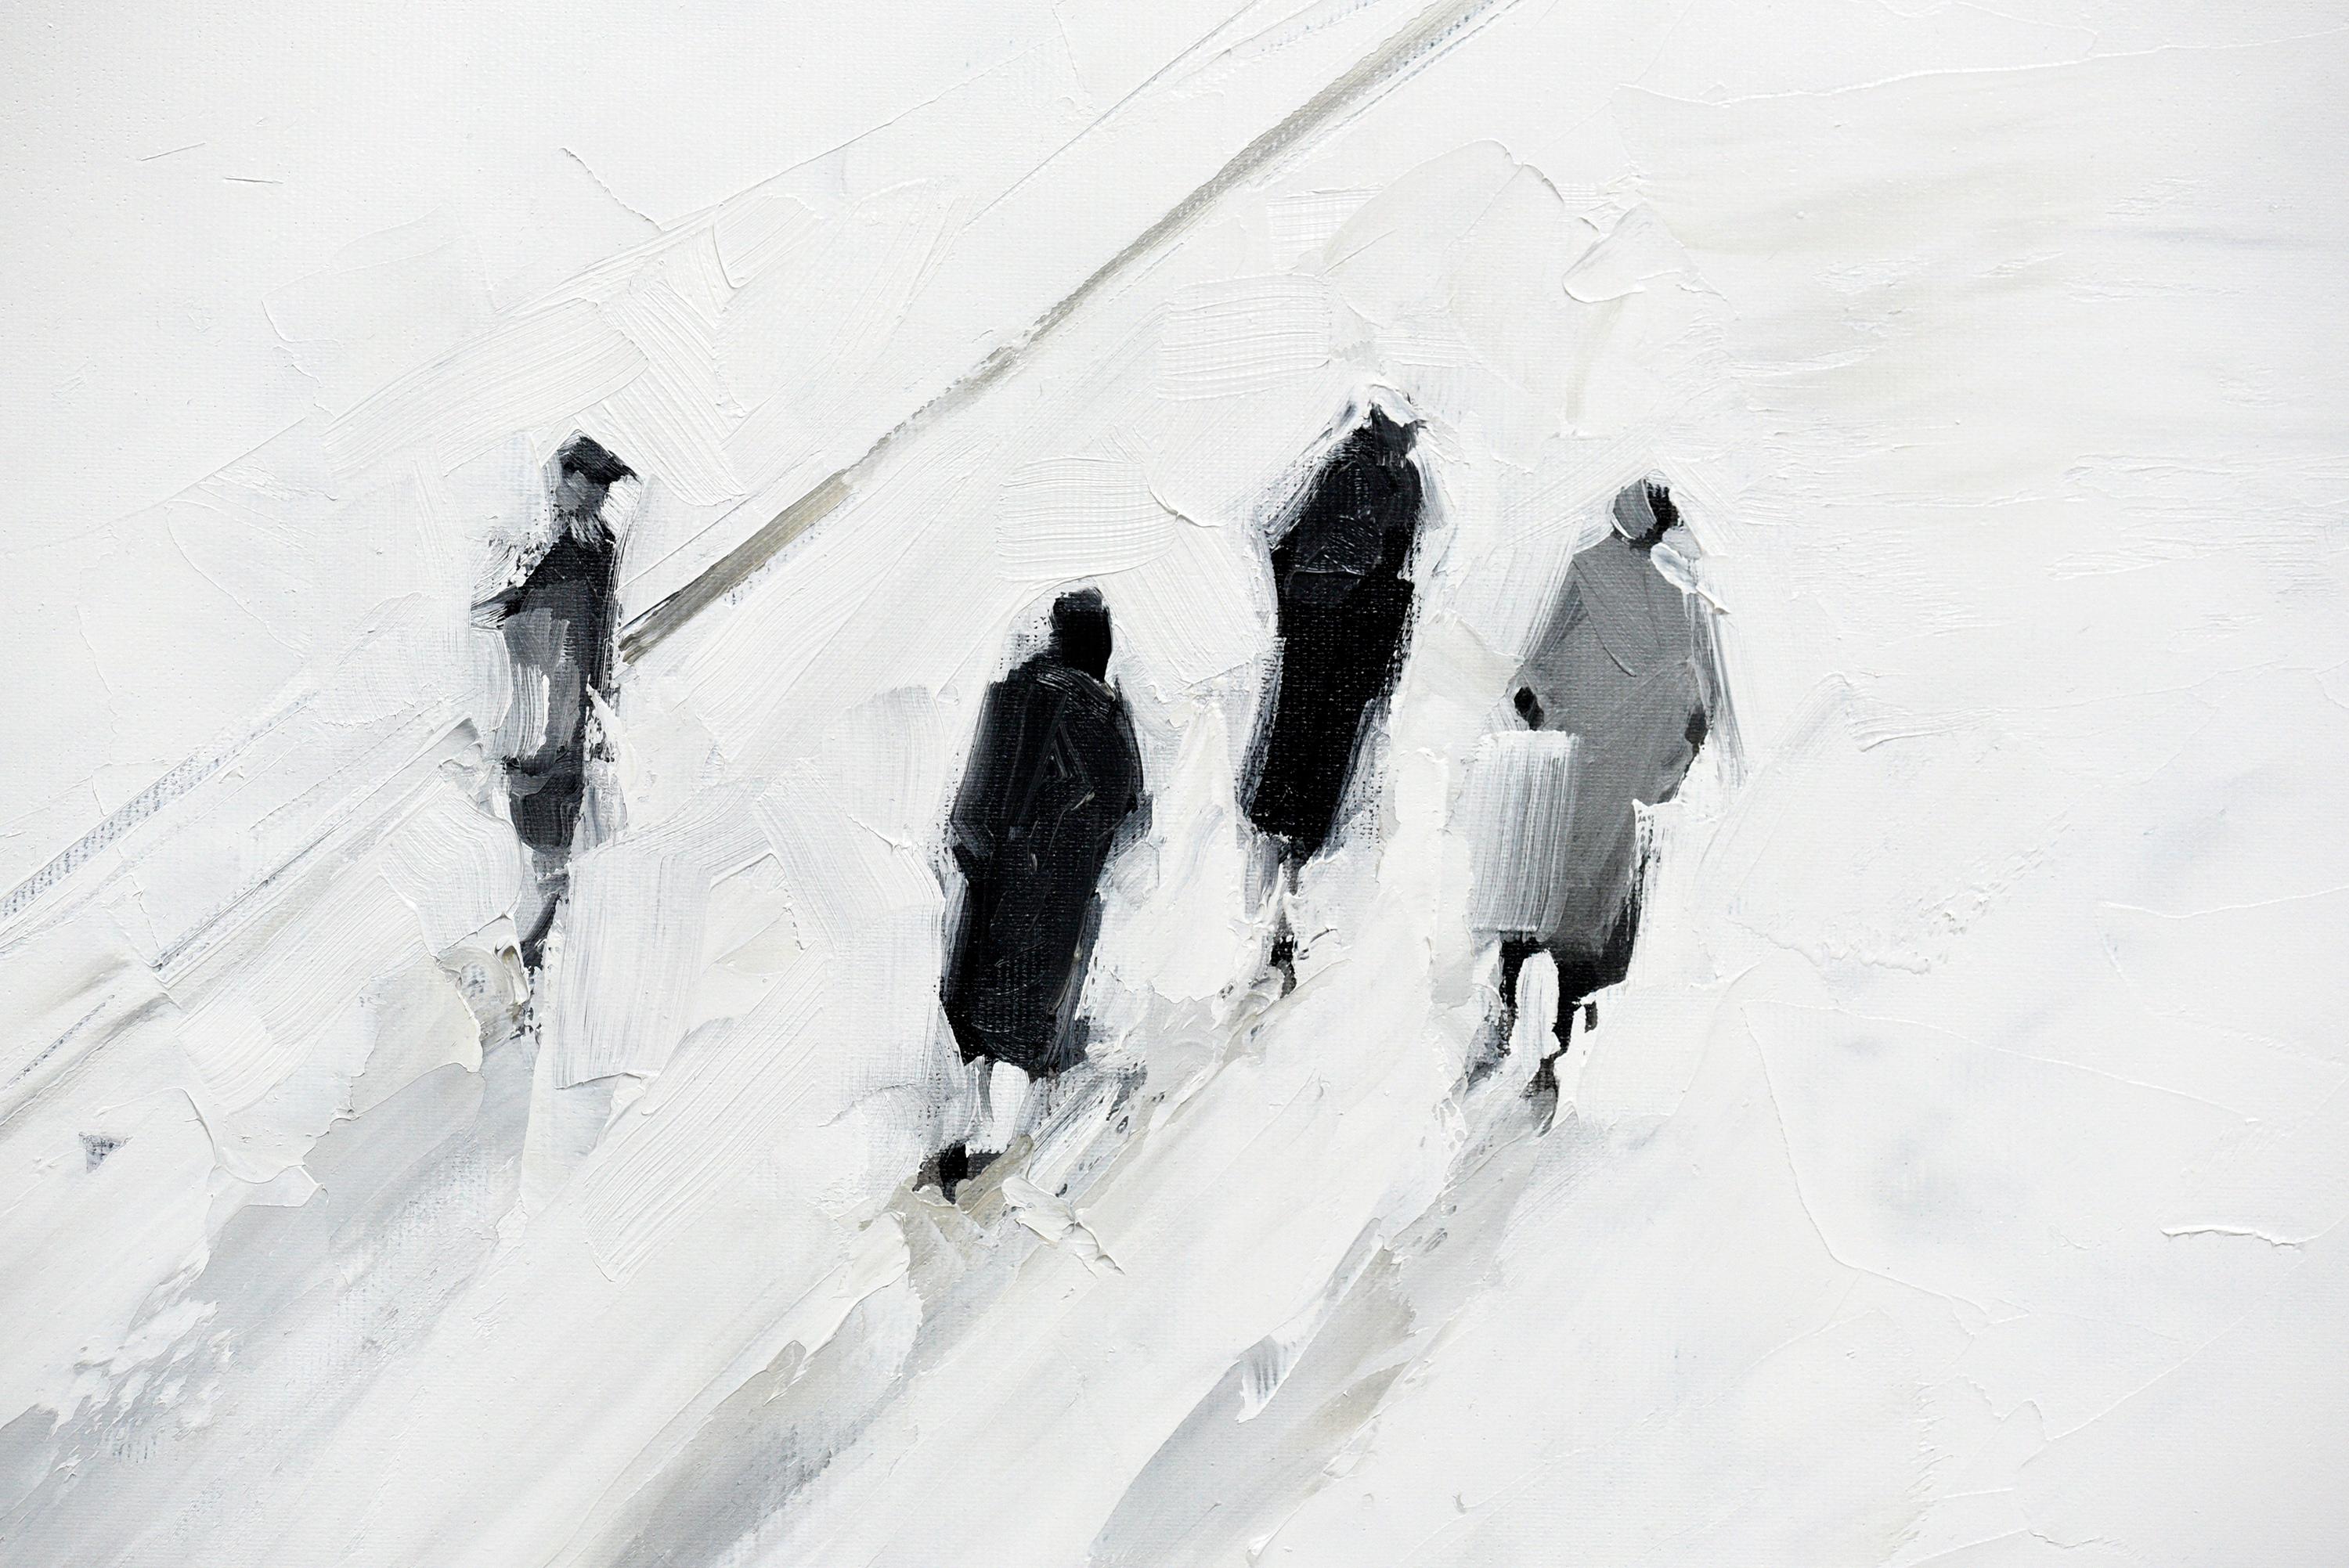 Phantom
80 x 120 cm
oil on canvas 
2020

A wide, apparently endless plain forms the background of the events: out of nowhere, dark figures enter the scenery, as if coming from the depths of the canvas, appearing through layers of bright, shiny white